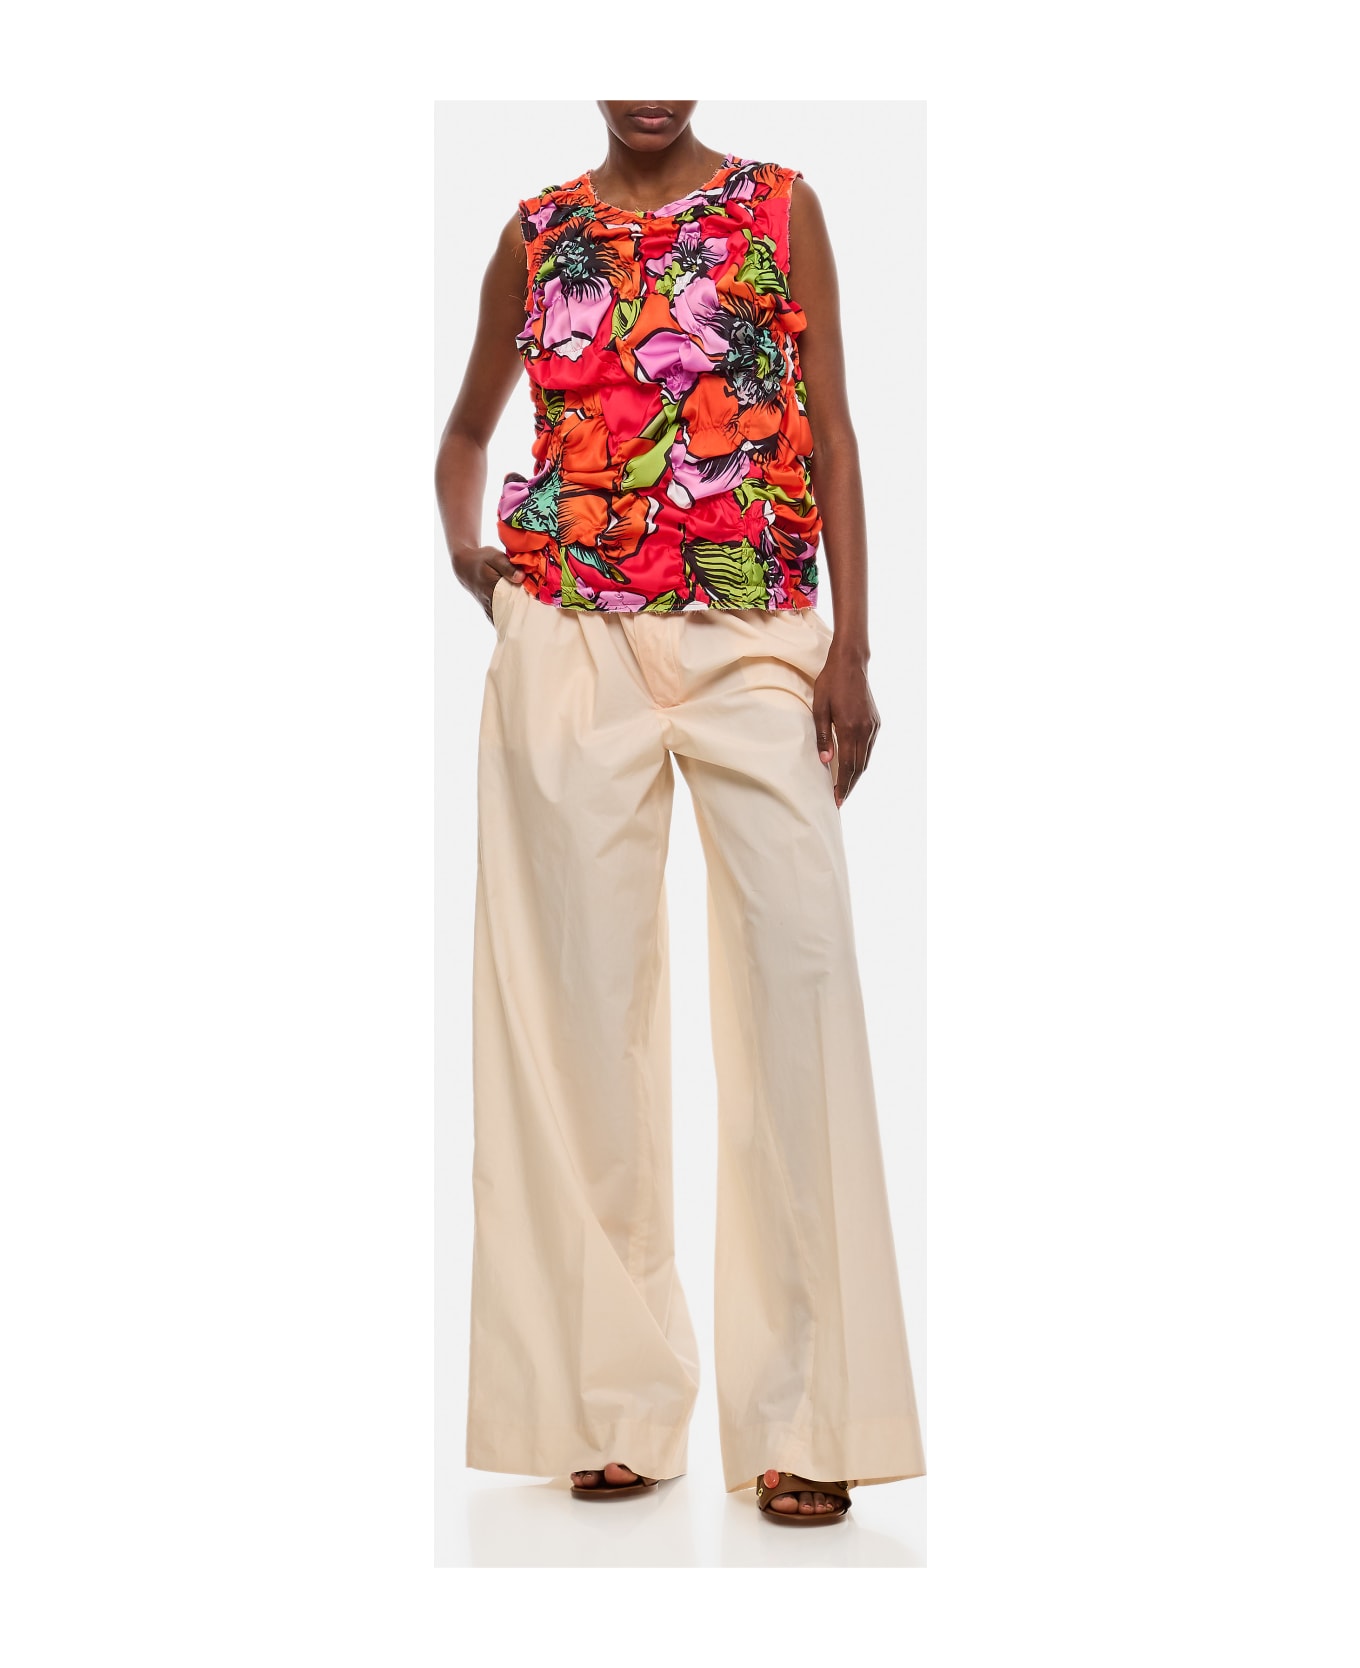 Quira Oversized Cotton Trousers